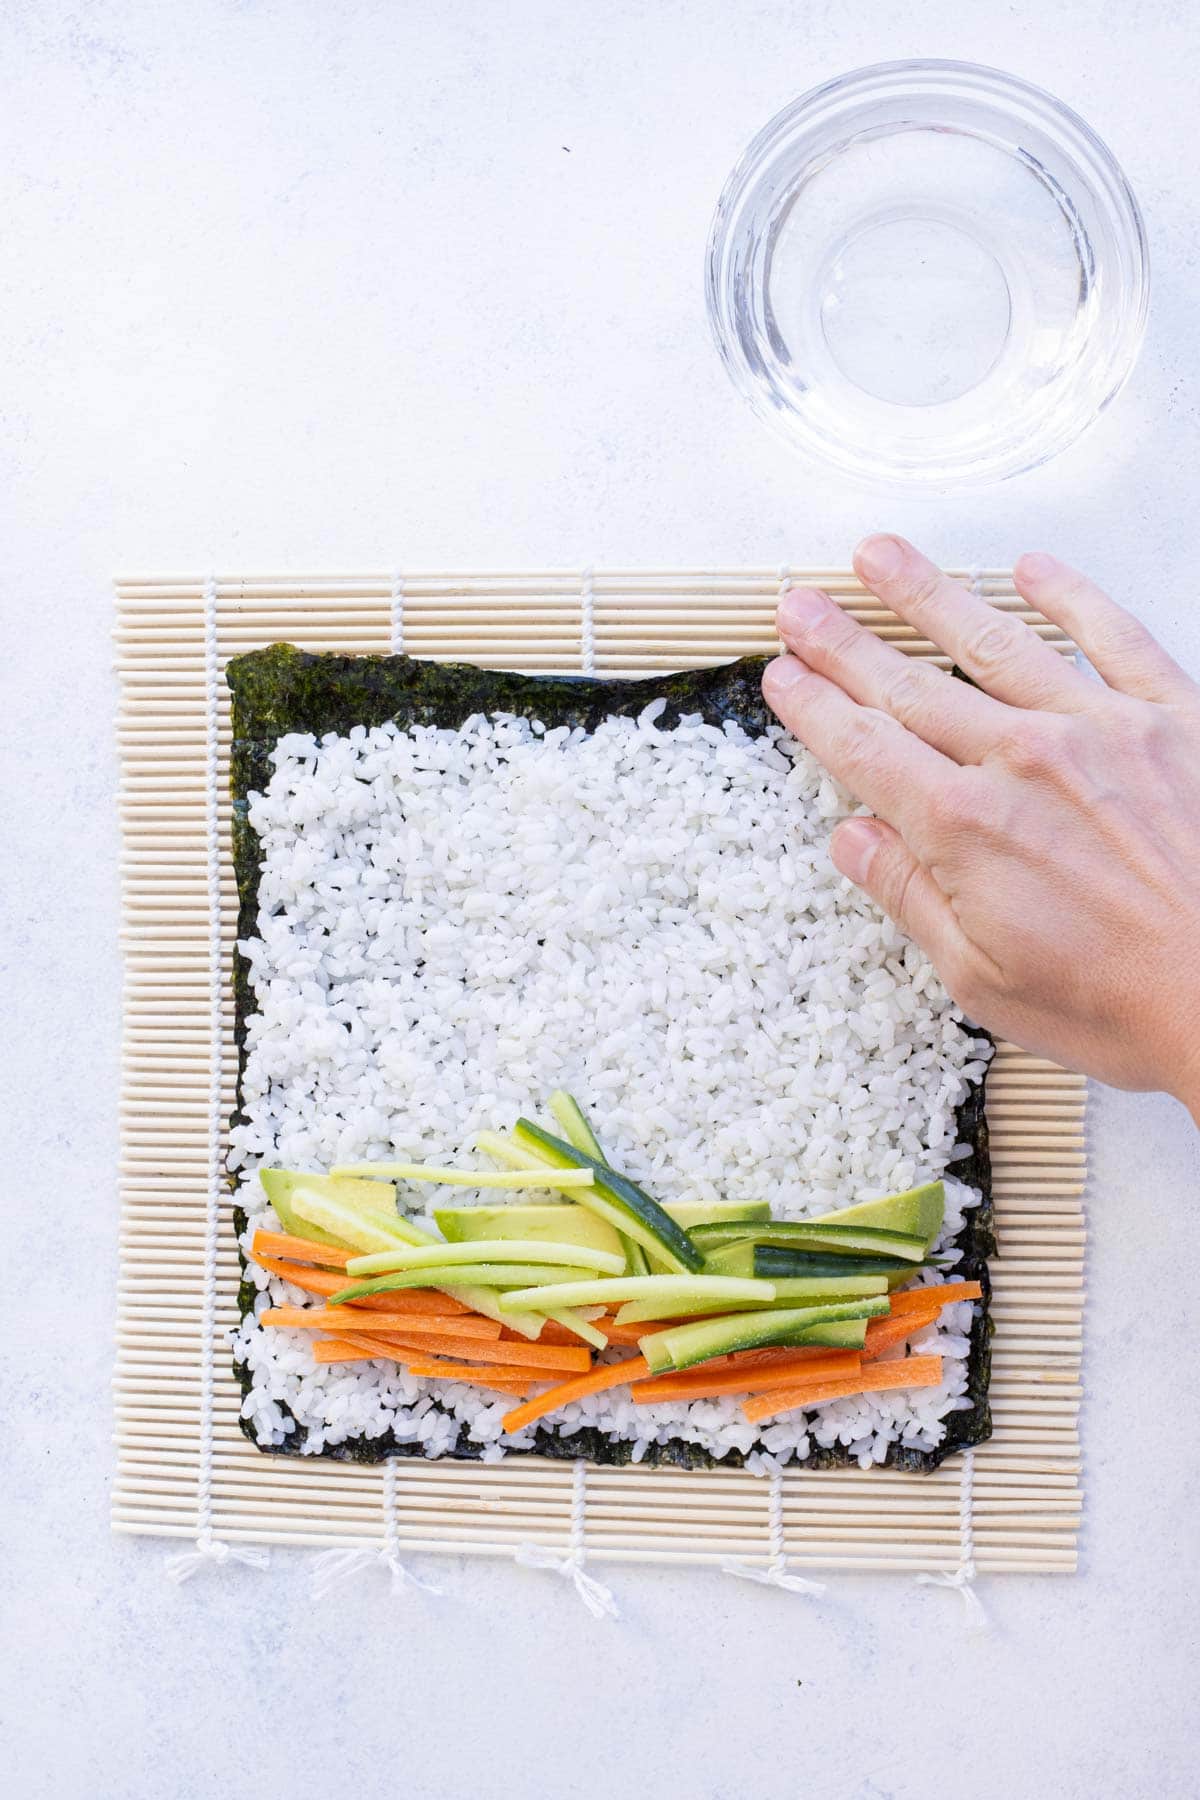 Step-by-step: How to make your own sushi rolls